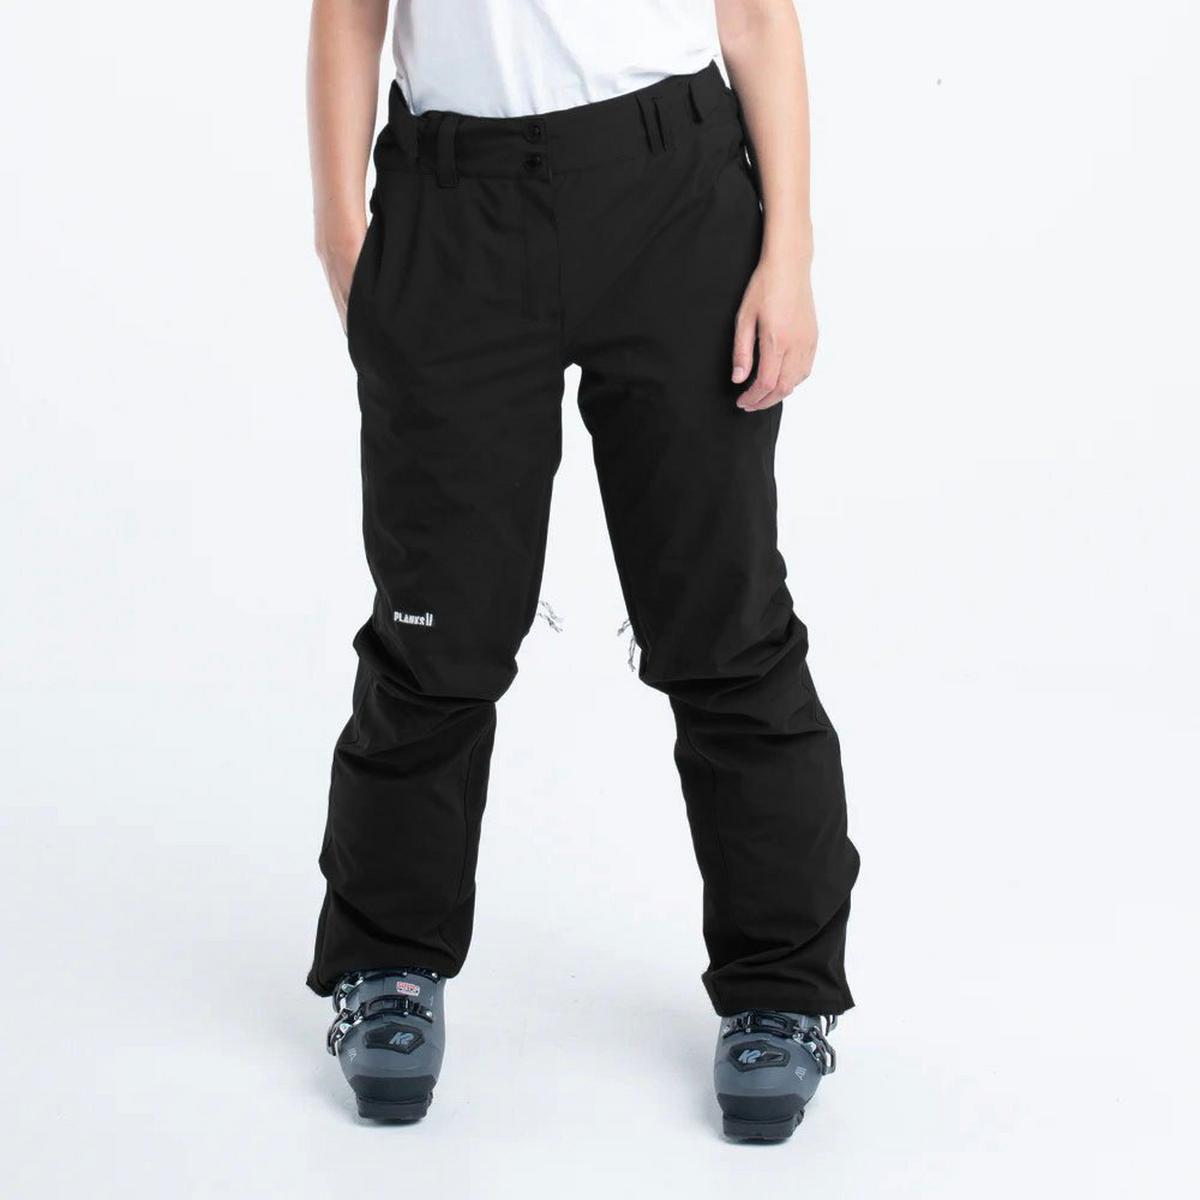 Planks Women's All Time Insulated Pant - Black